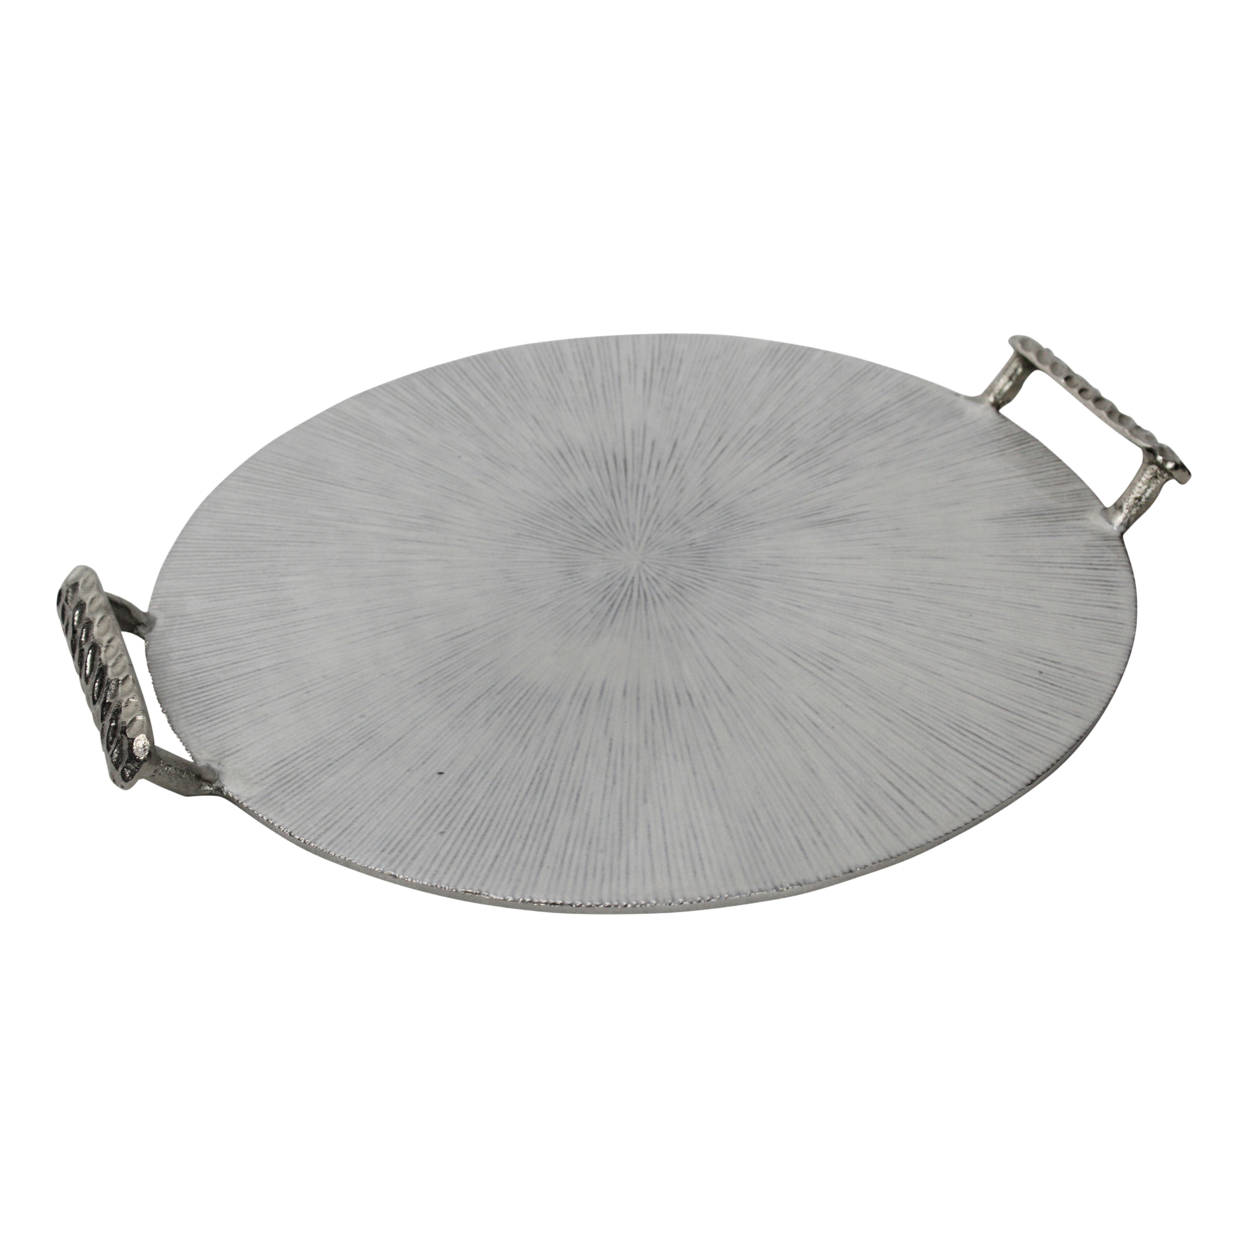 18 Inches Round Metal Frame Tray With Handles, Silver- Saltoro Sherpi